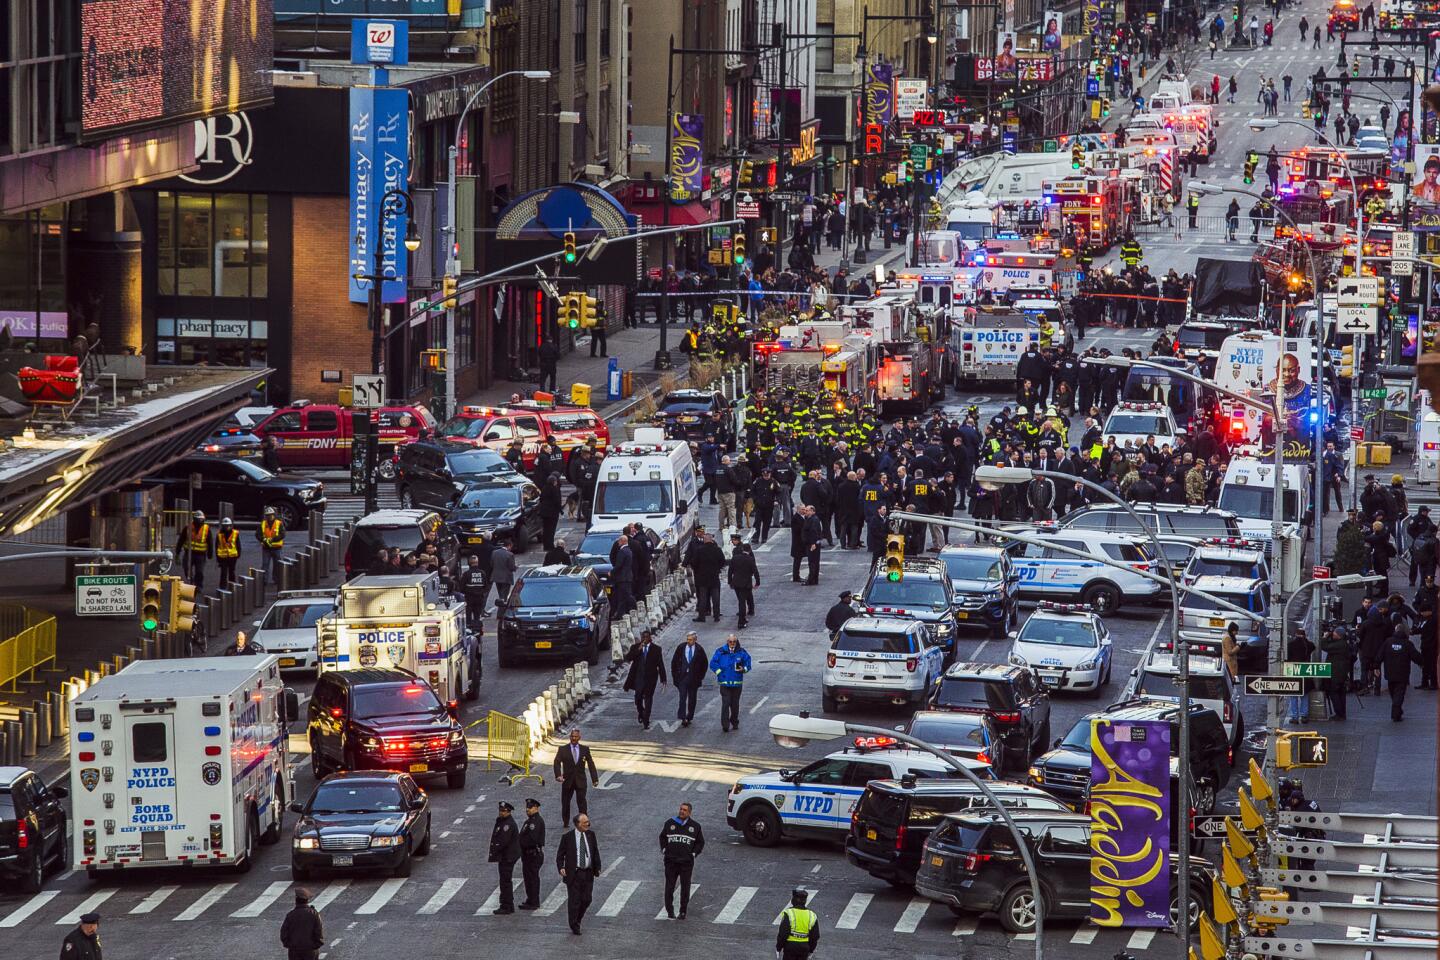 Law enforcement officials work following an explosion near New York's Times Square on Dec. 11, 2017.